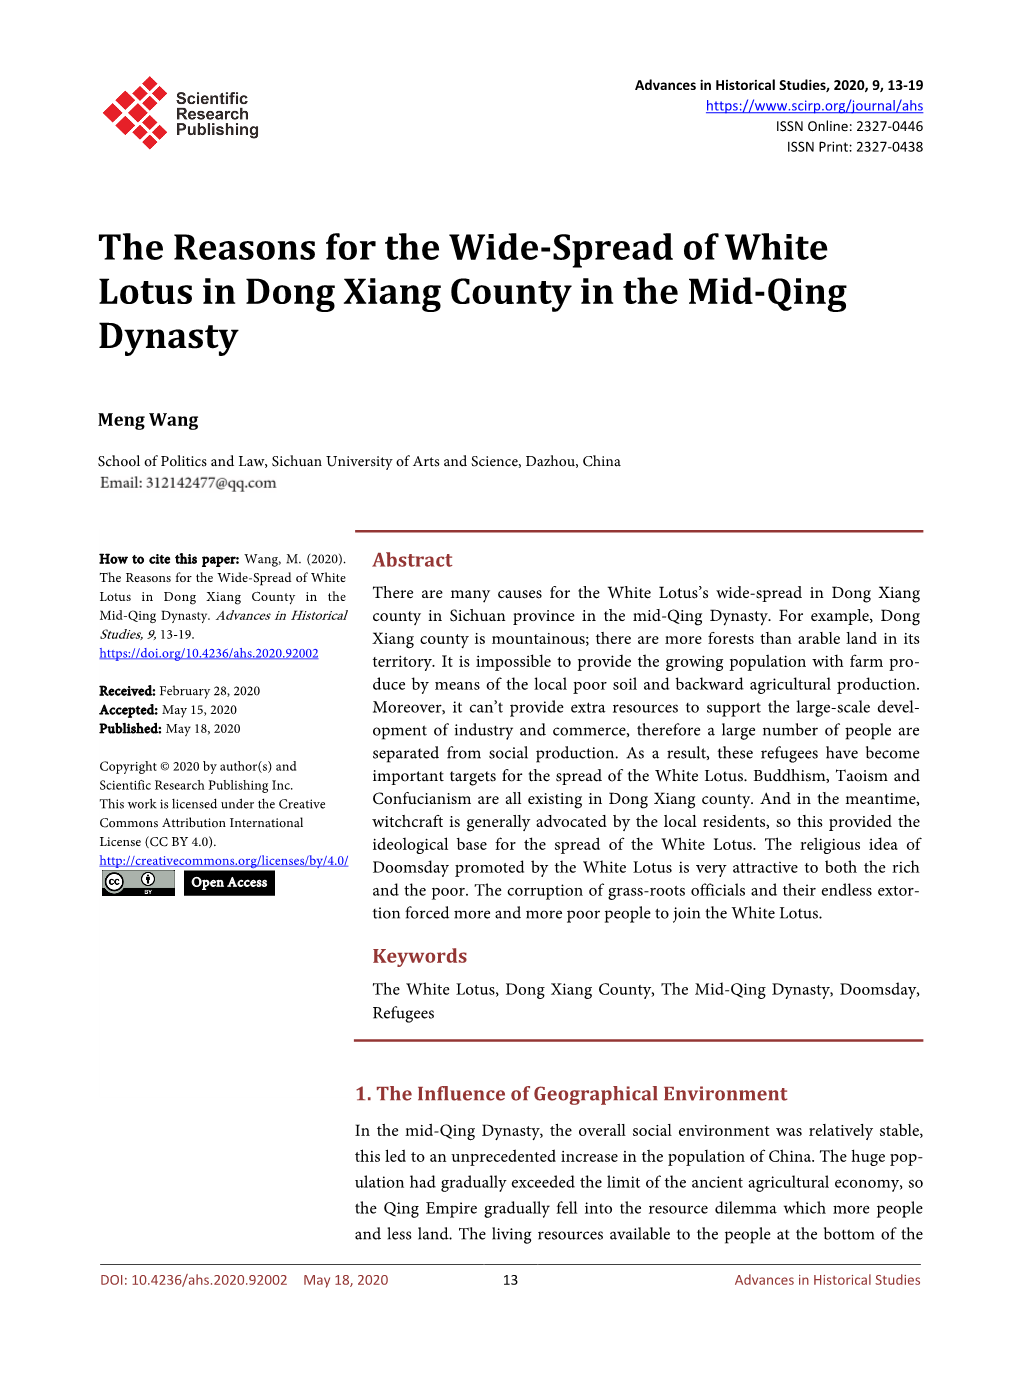 The Reasons for the Wide-Spread of White Lotus in Dong Xiang County in the Mid-Qing Dynasty